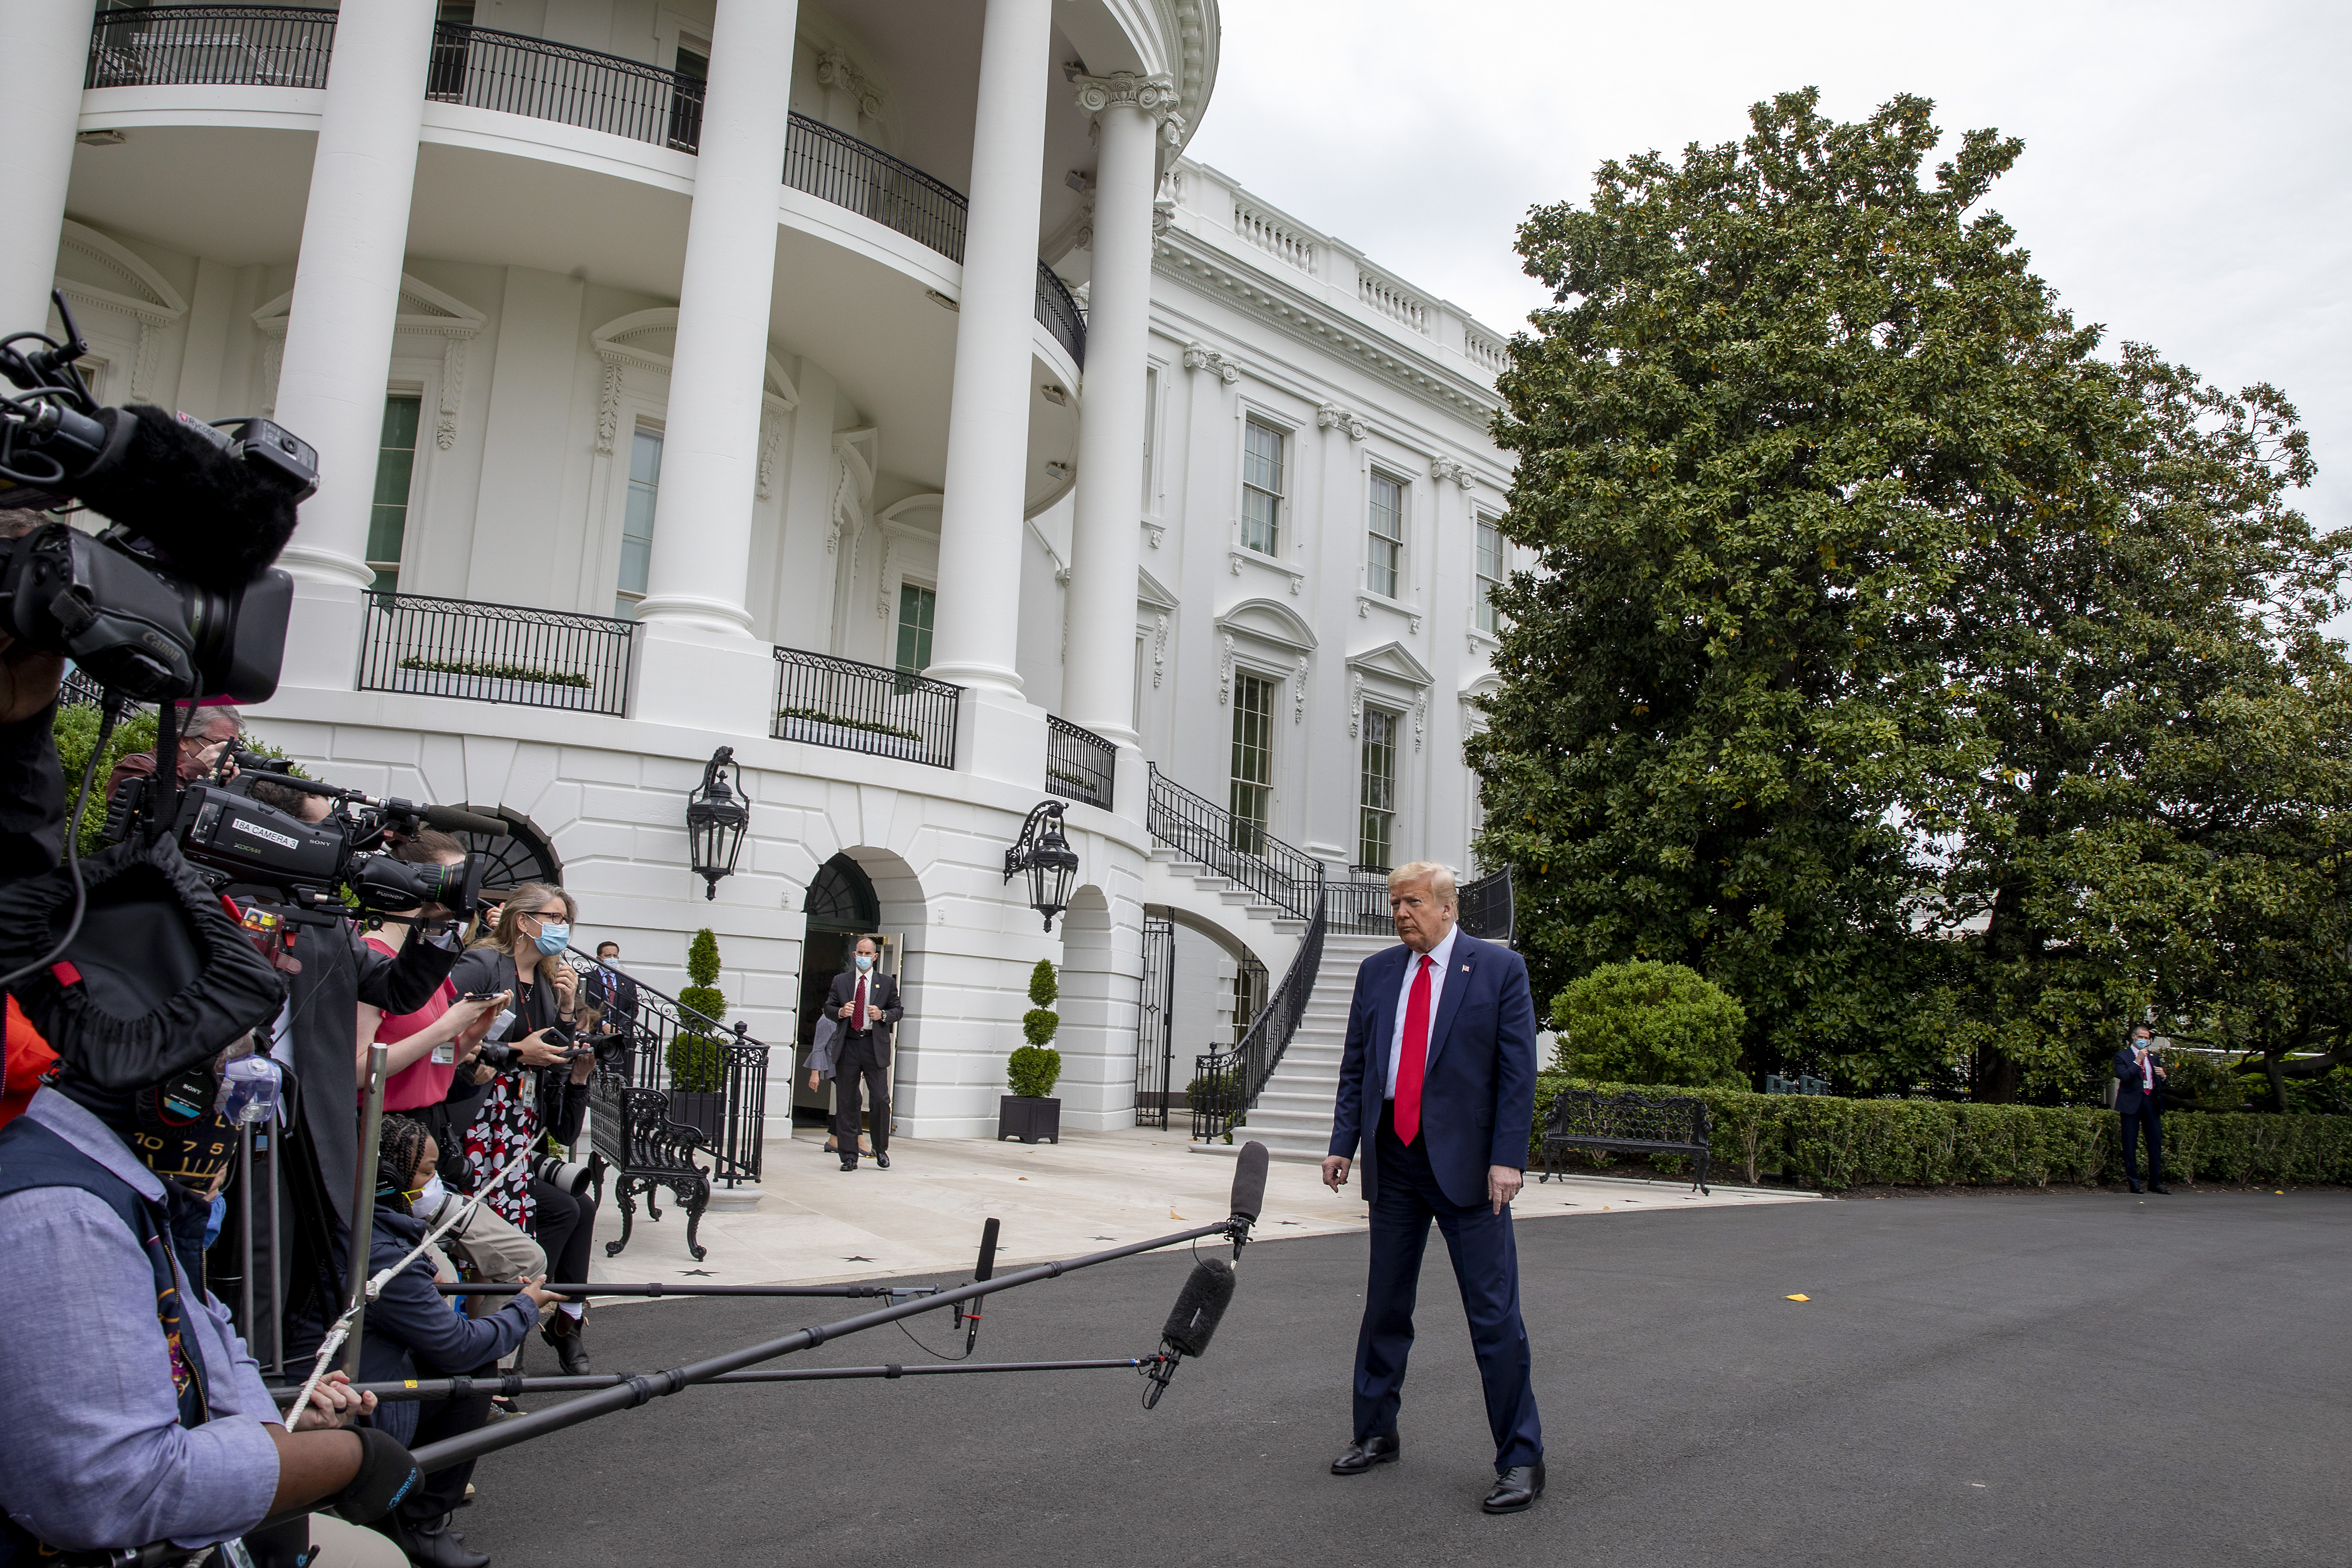 WASHINGTON, DC - MAY 17: US President Donald Trump talks to the media after landing on the south lawn of the White House on May 17, 2020 in Washington, DC. Asked by the media if he had seen President Obama's graduation remarks the night before, Trump said he had not and added, "...he was an incompetent president, that's all I can say." (Photo by Tasos Katopodis/Getty Images)